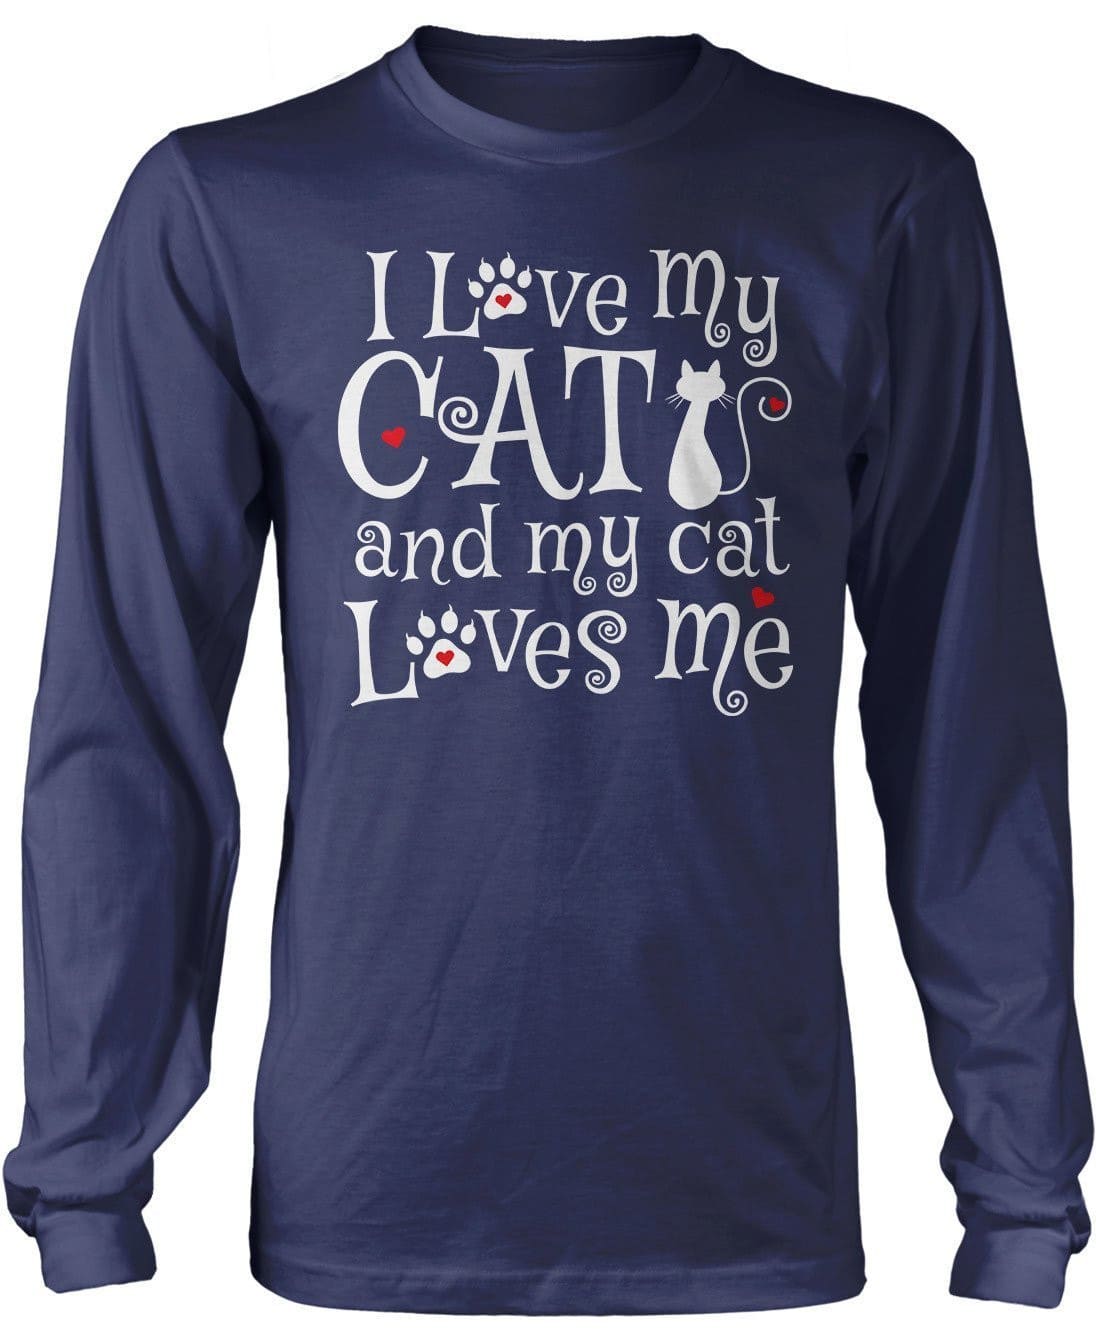 I Love My Cat and My Cat Loves Me T-Shirt